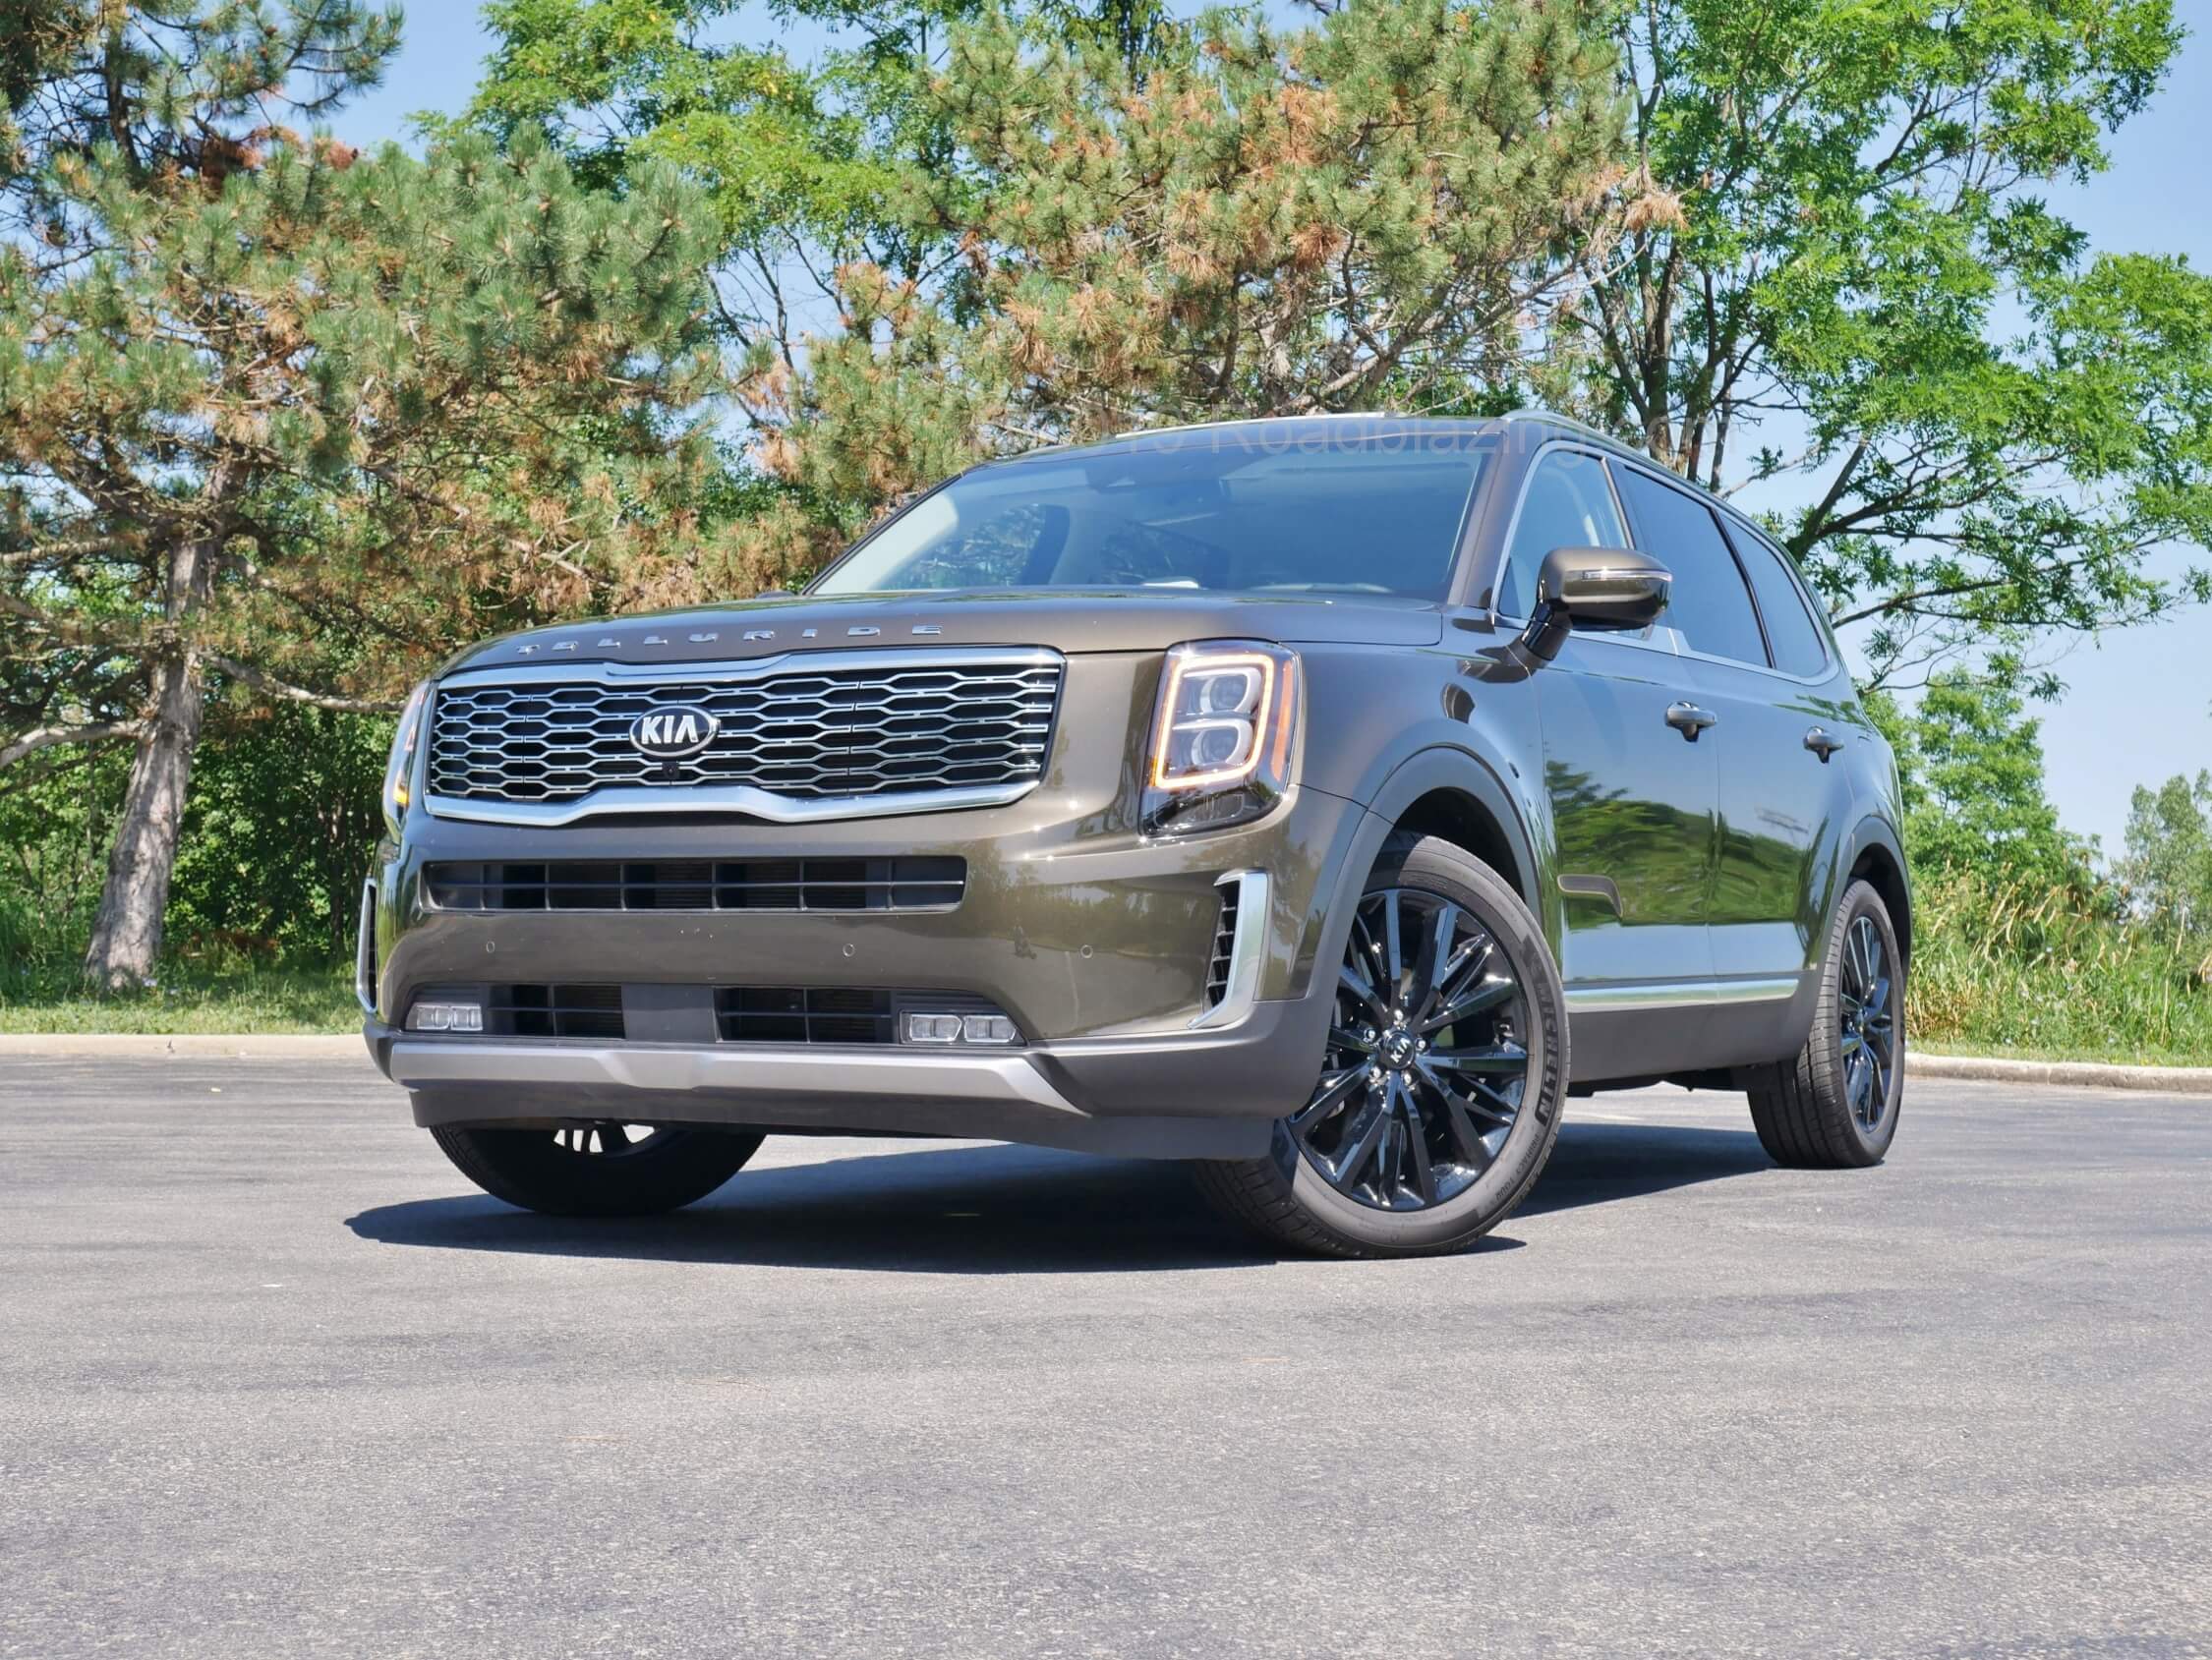 2020 Kia Telluride SX AWD: Vertically arrayed LED headlamps seem more Escalade assertive, while the clamshell hood carries the "TELLURIDE" lettering above the wide lattice kidney grill, in a very British royalty goes to Balmoral way.